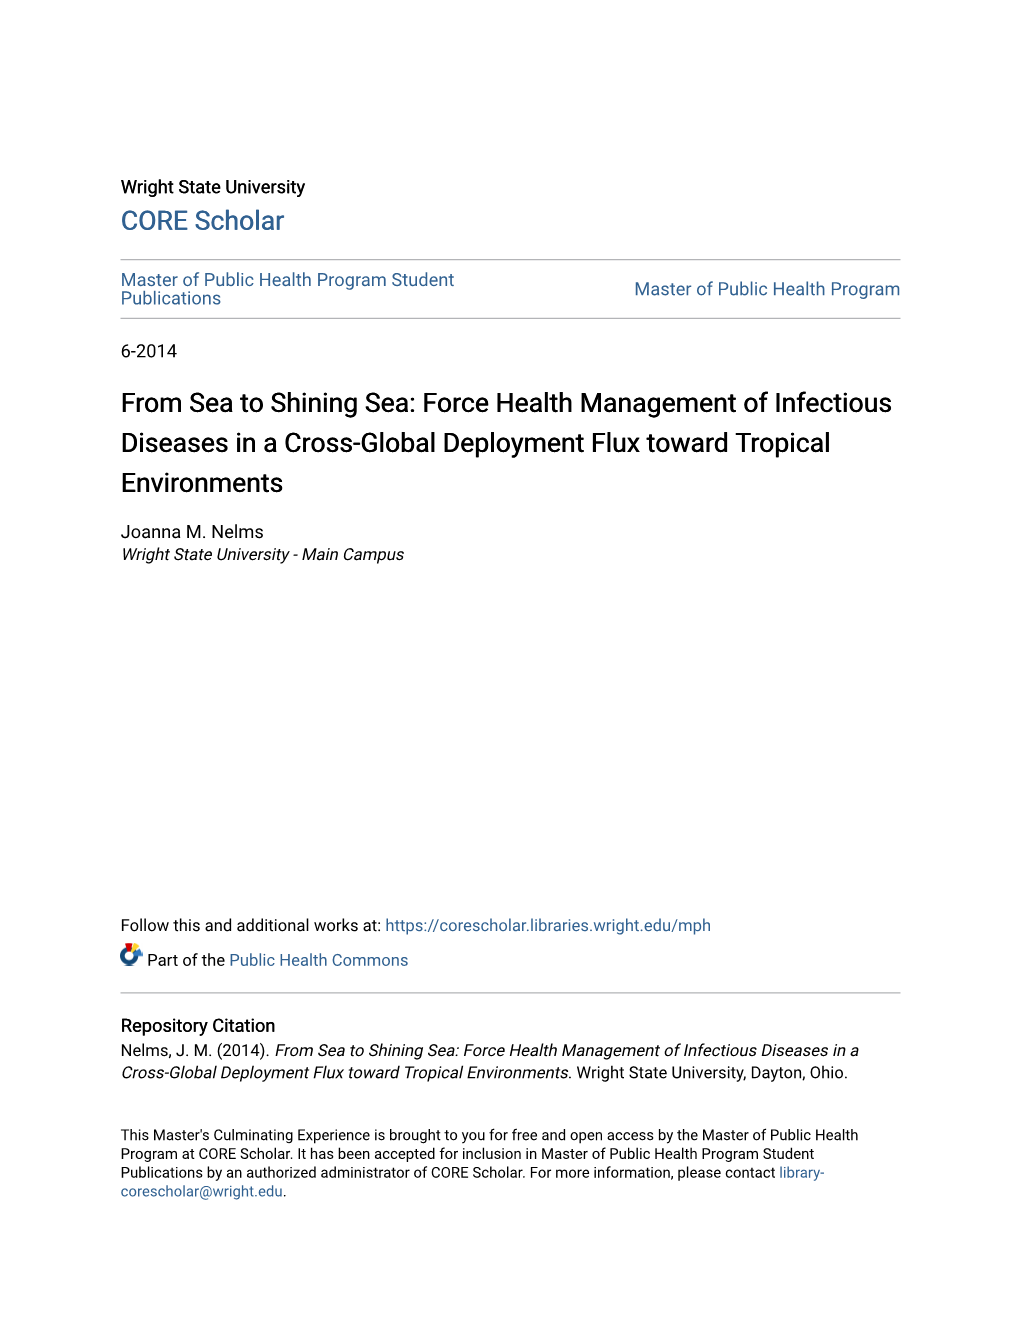 Force Health Management of Infectious Diseases in a Cross-Global Deployment Flux Toward Tropical Environments